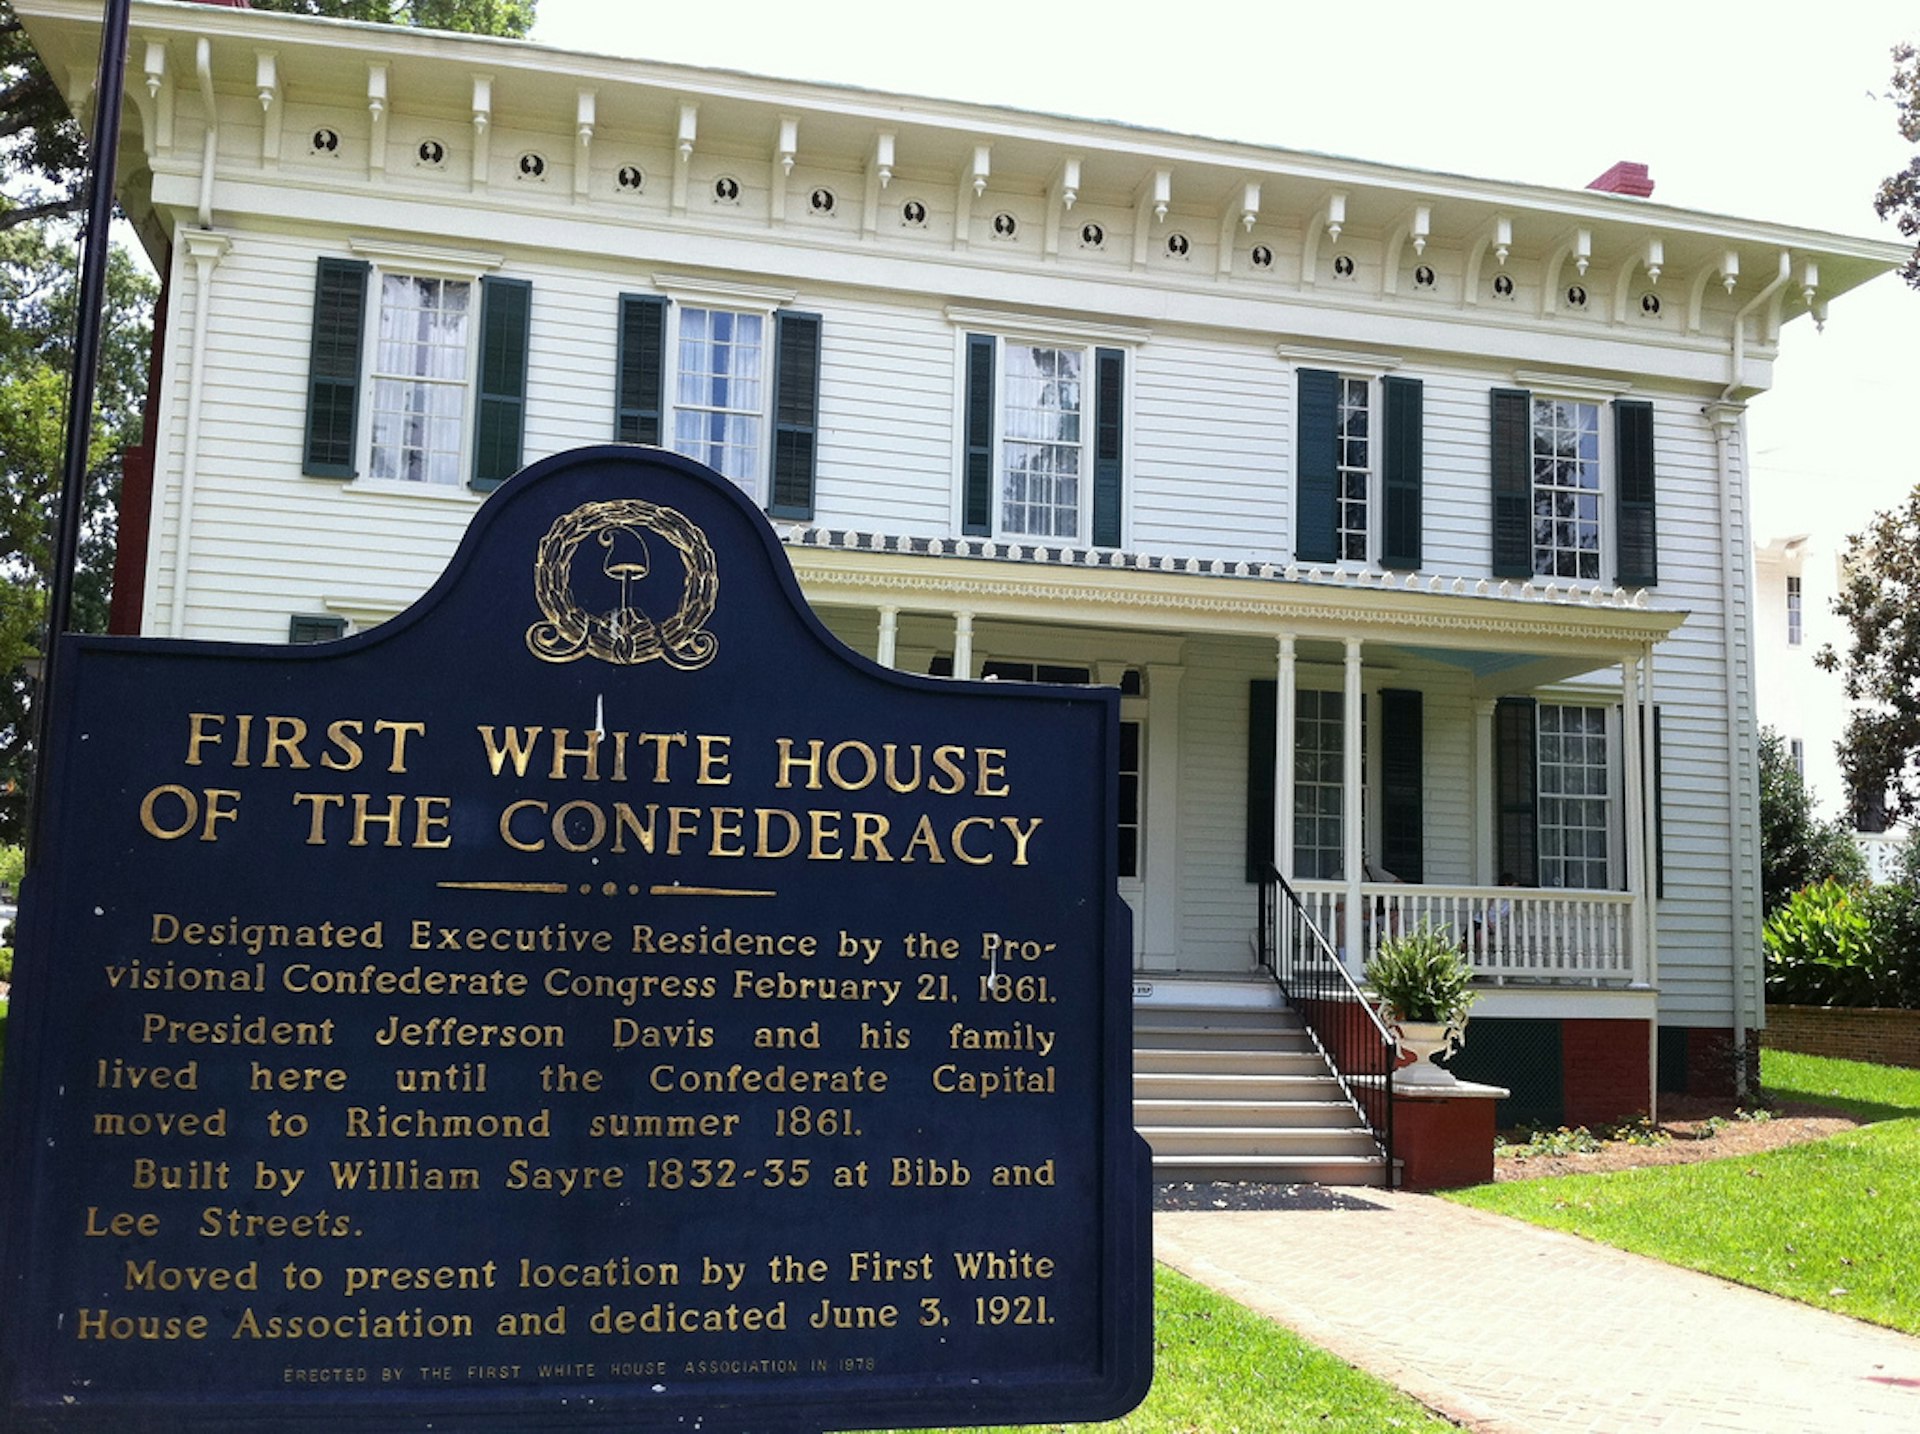 White House of the Confederacy in Richmond. Photo by TranceMist / CC BY 2.0